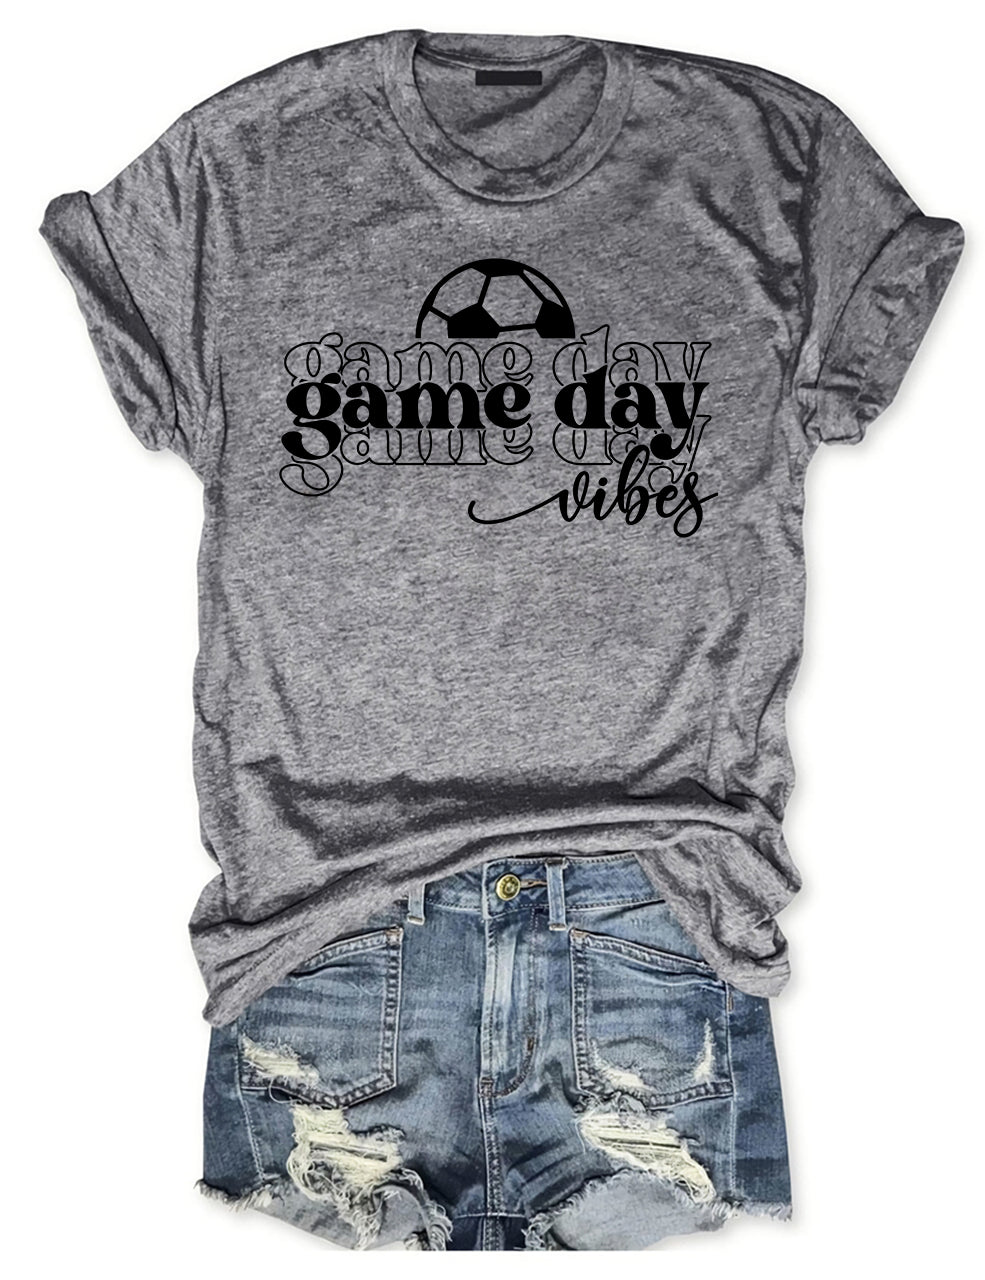 Soccer Game Day Vibes T-shirt